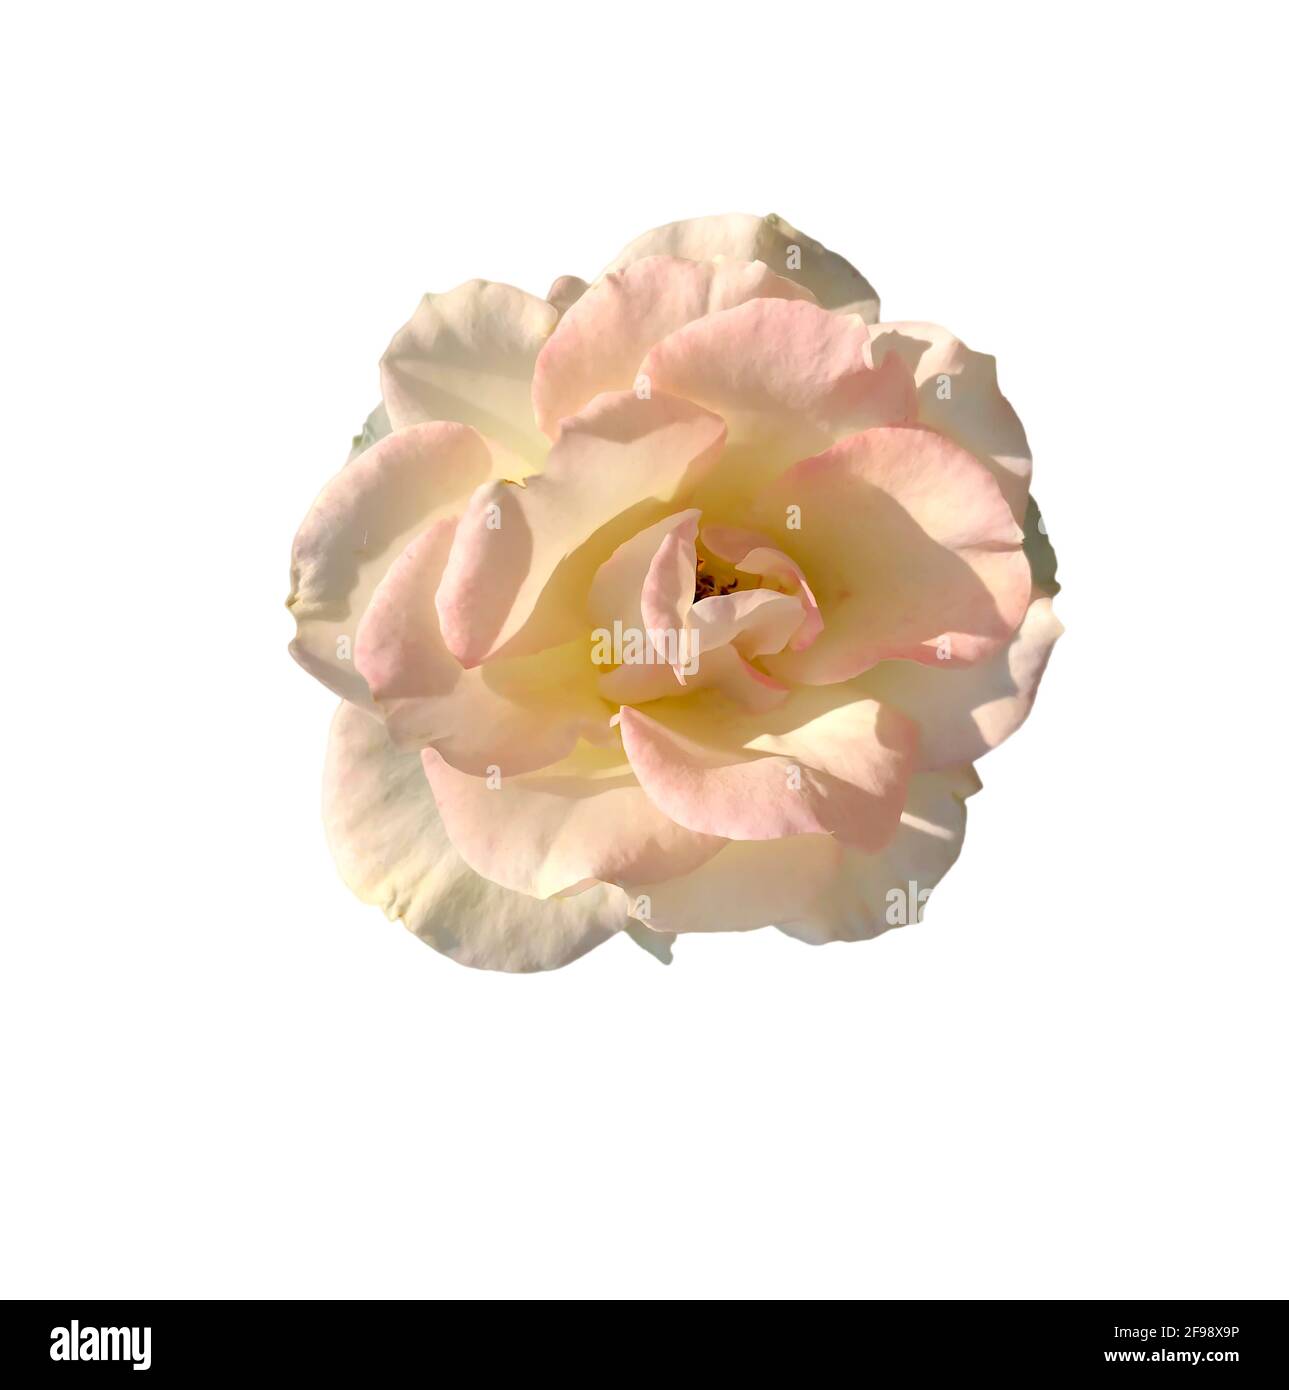 The roses are on a white background that can be used to make cards or compose images. Stock Photo